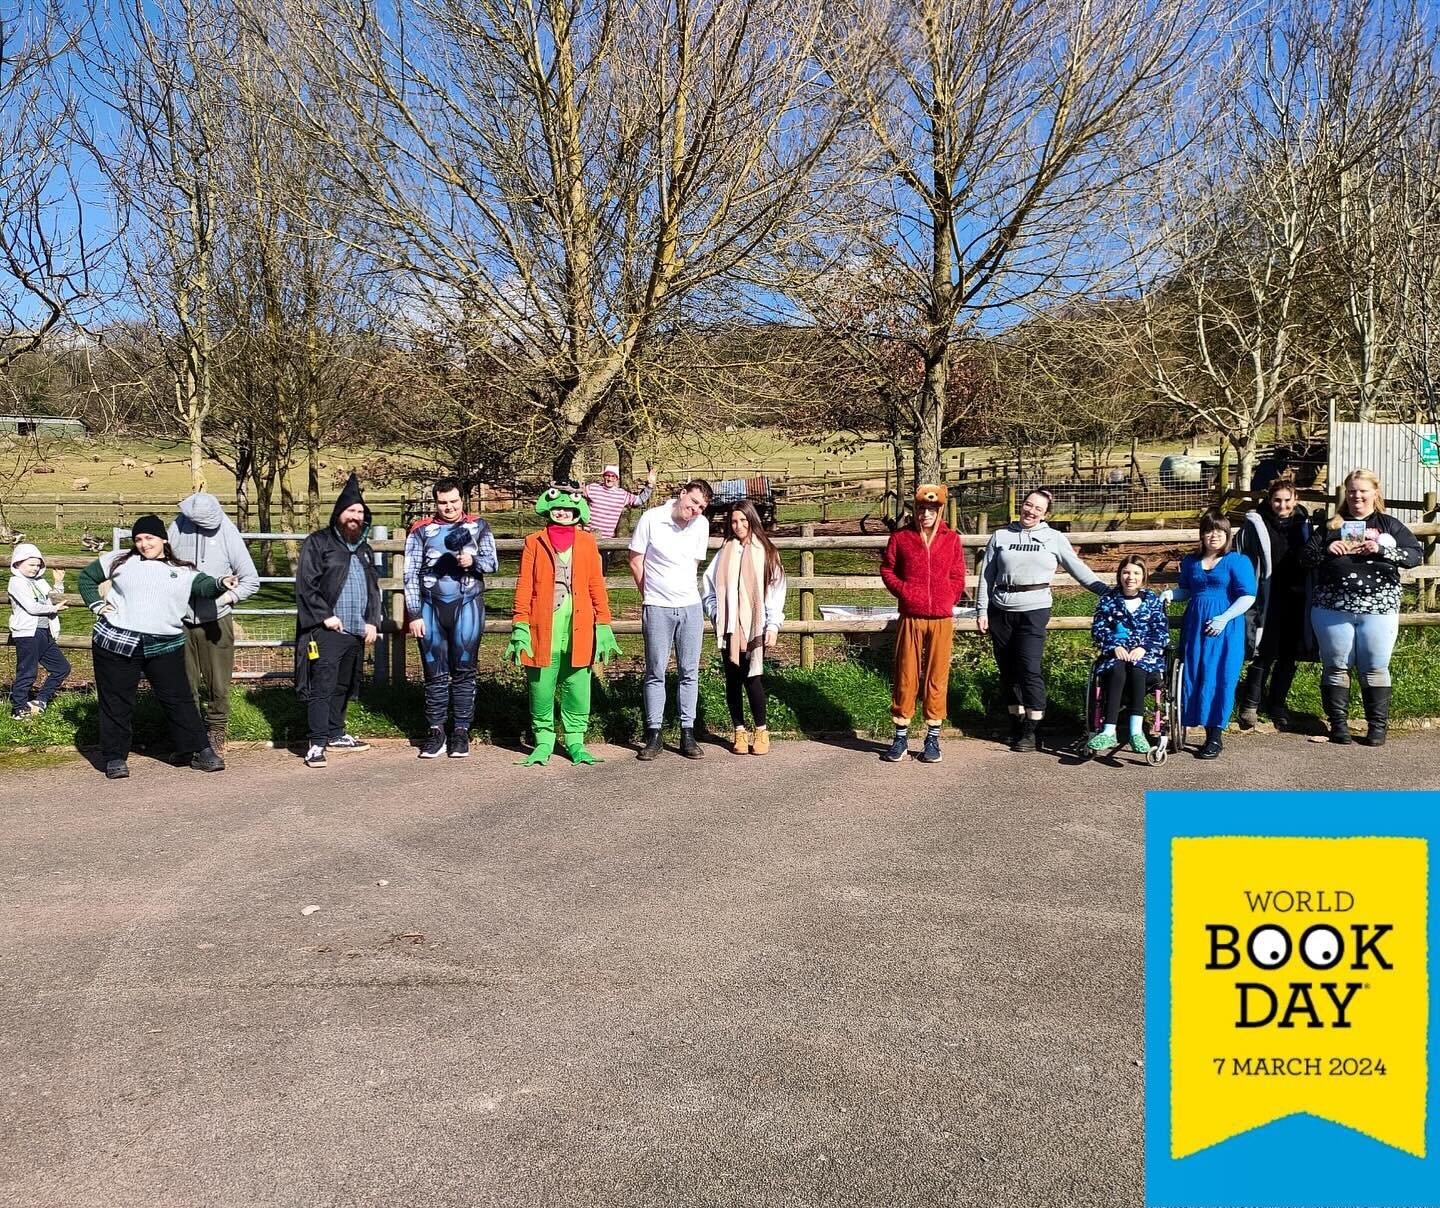 Promoting reading is something that we are passionate about here at Penstone and has become a real focus so it was only right that we took part in the World Book Day celebrations. We had some fantastic costumes worn by staff and students on the day, 